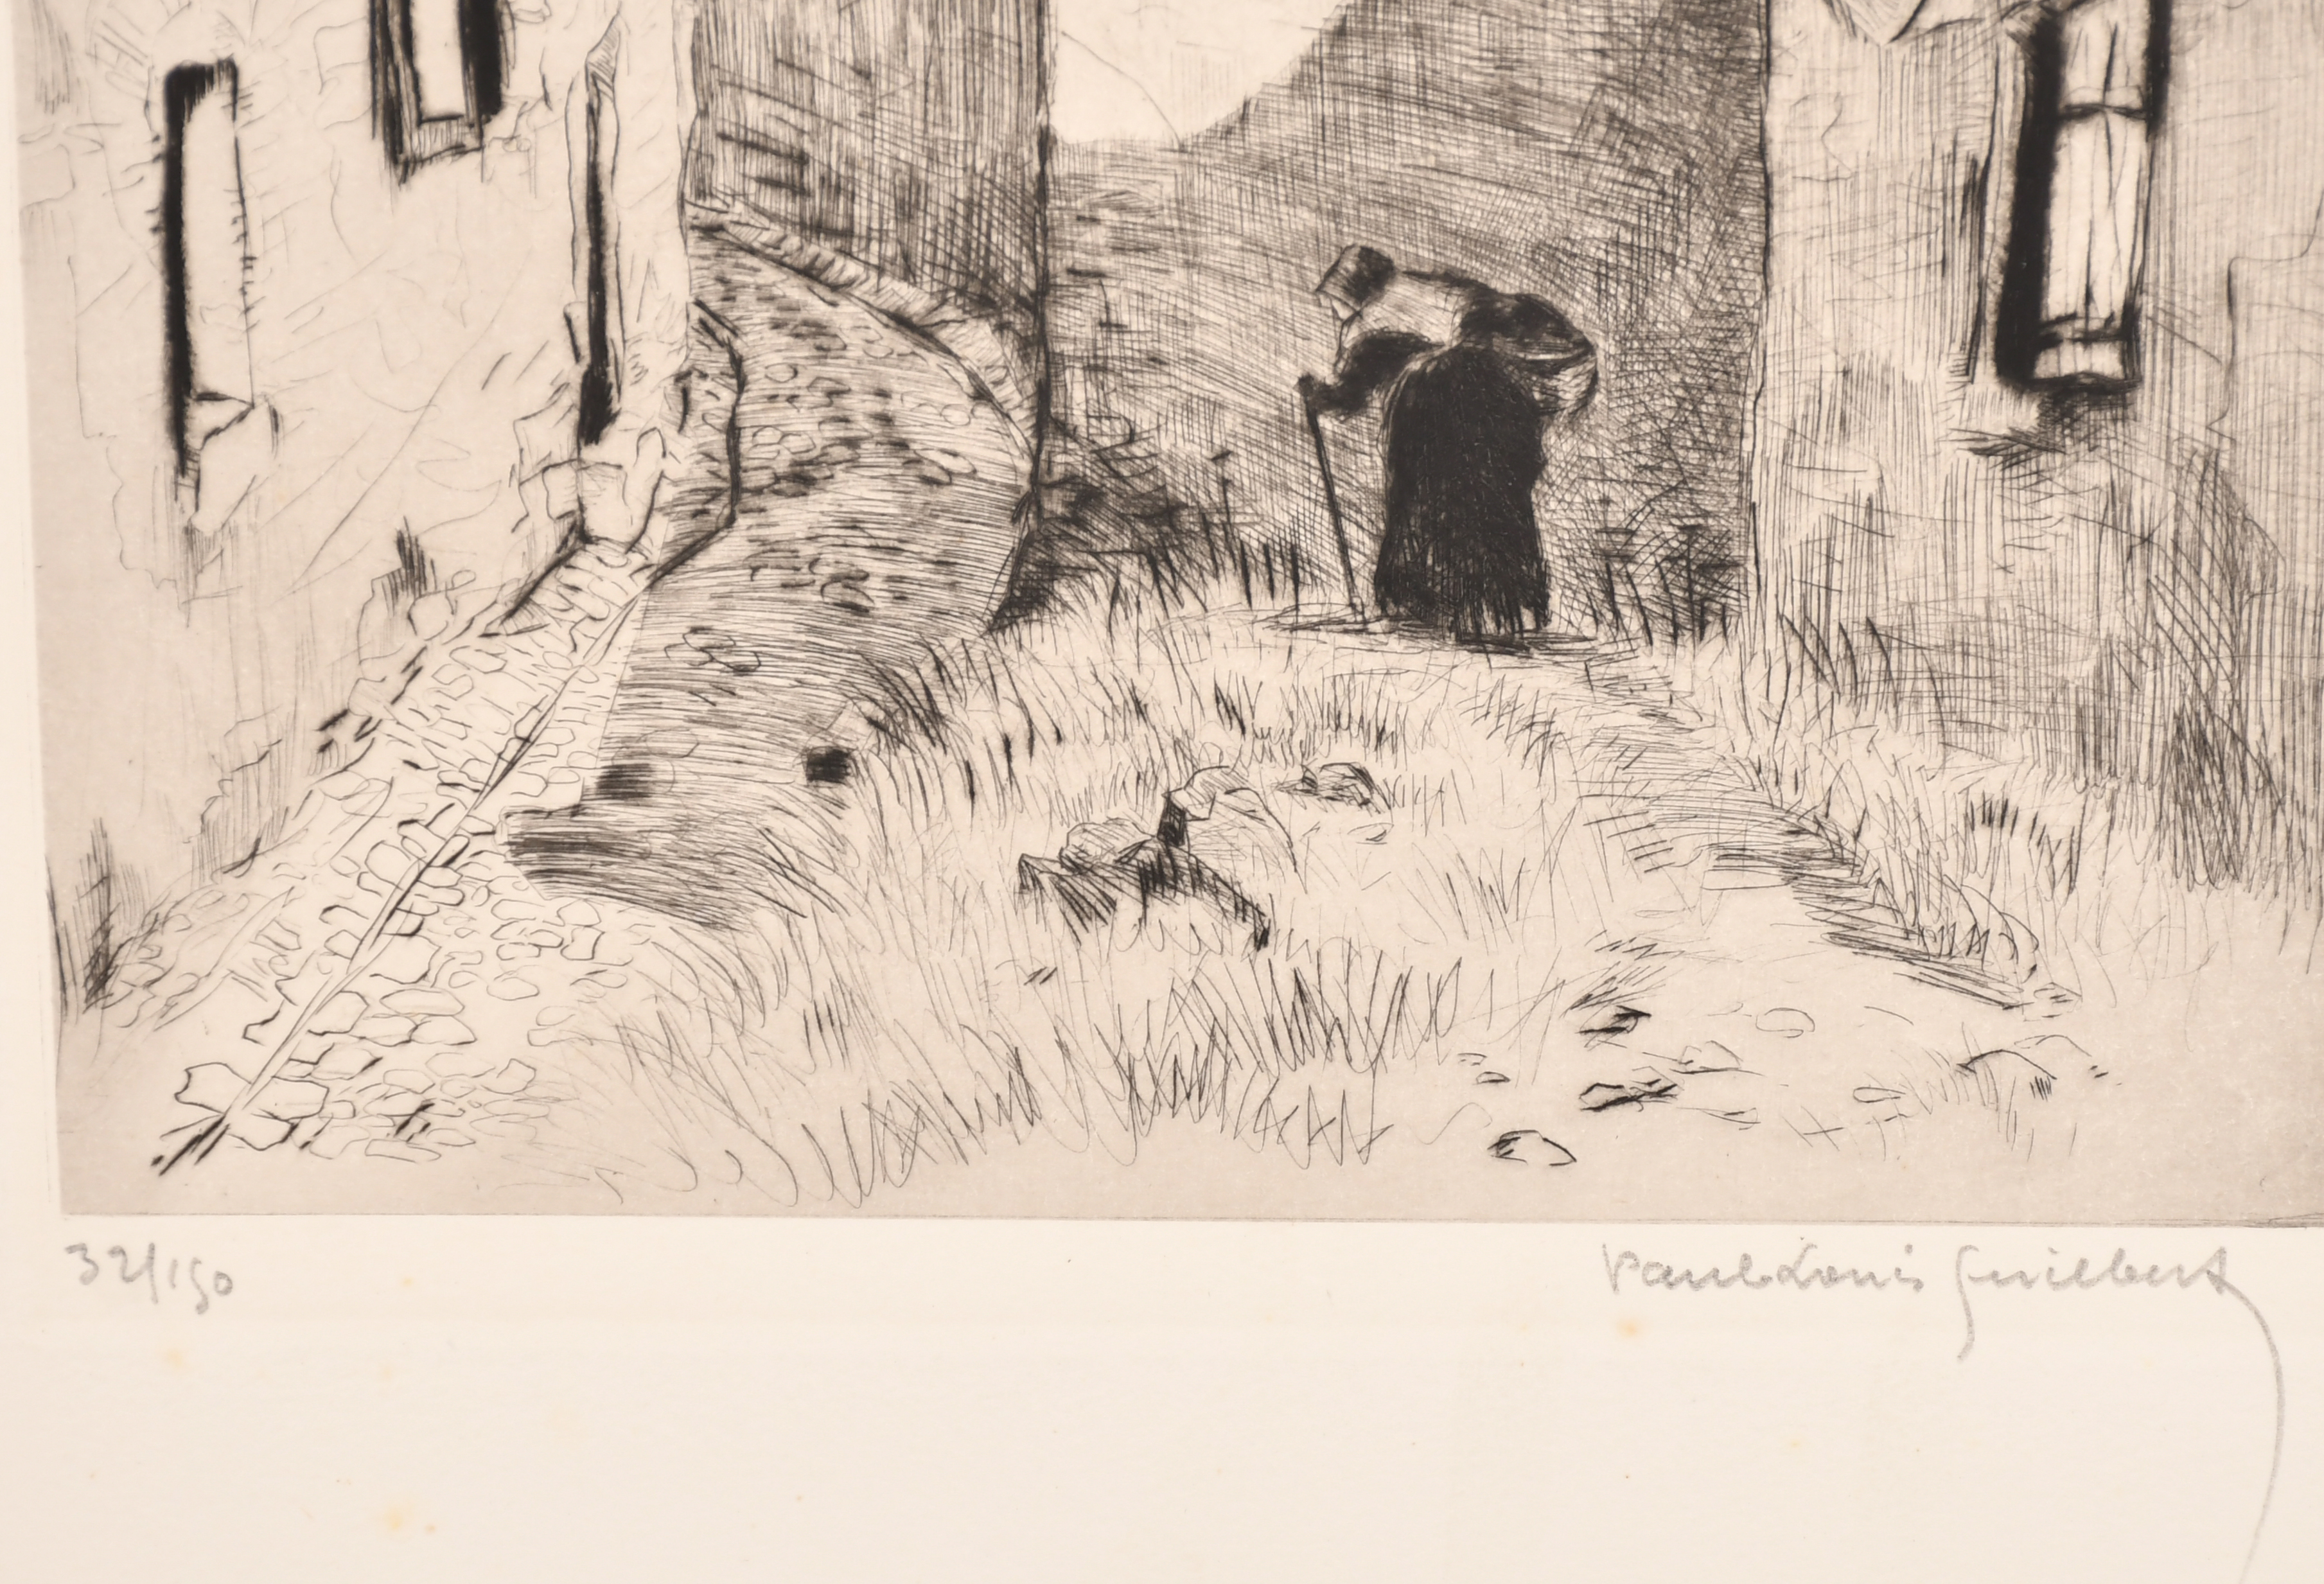 Paul Louis Guilbert (1886-1952) French. "Provence", Etching, Signed, inscribed and numbered 32/150 - Image 6 of 6